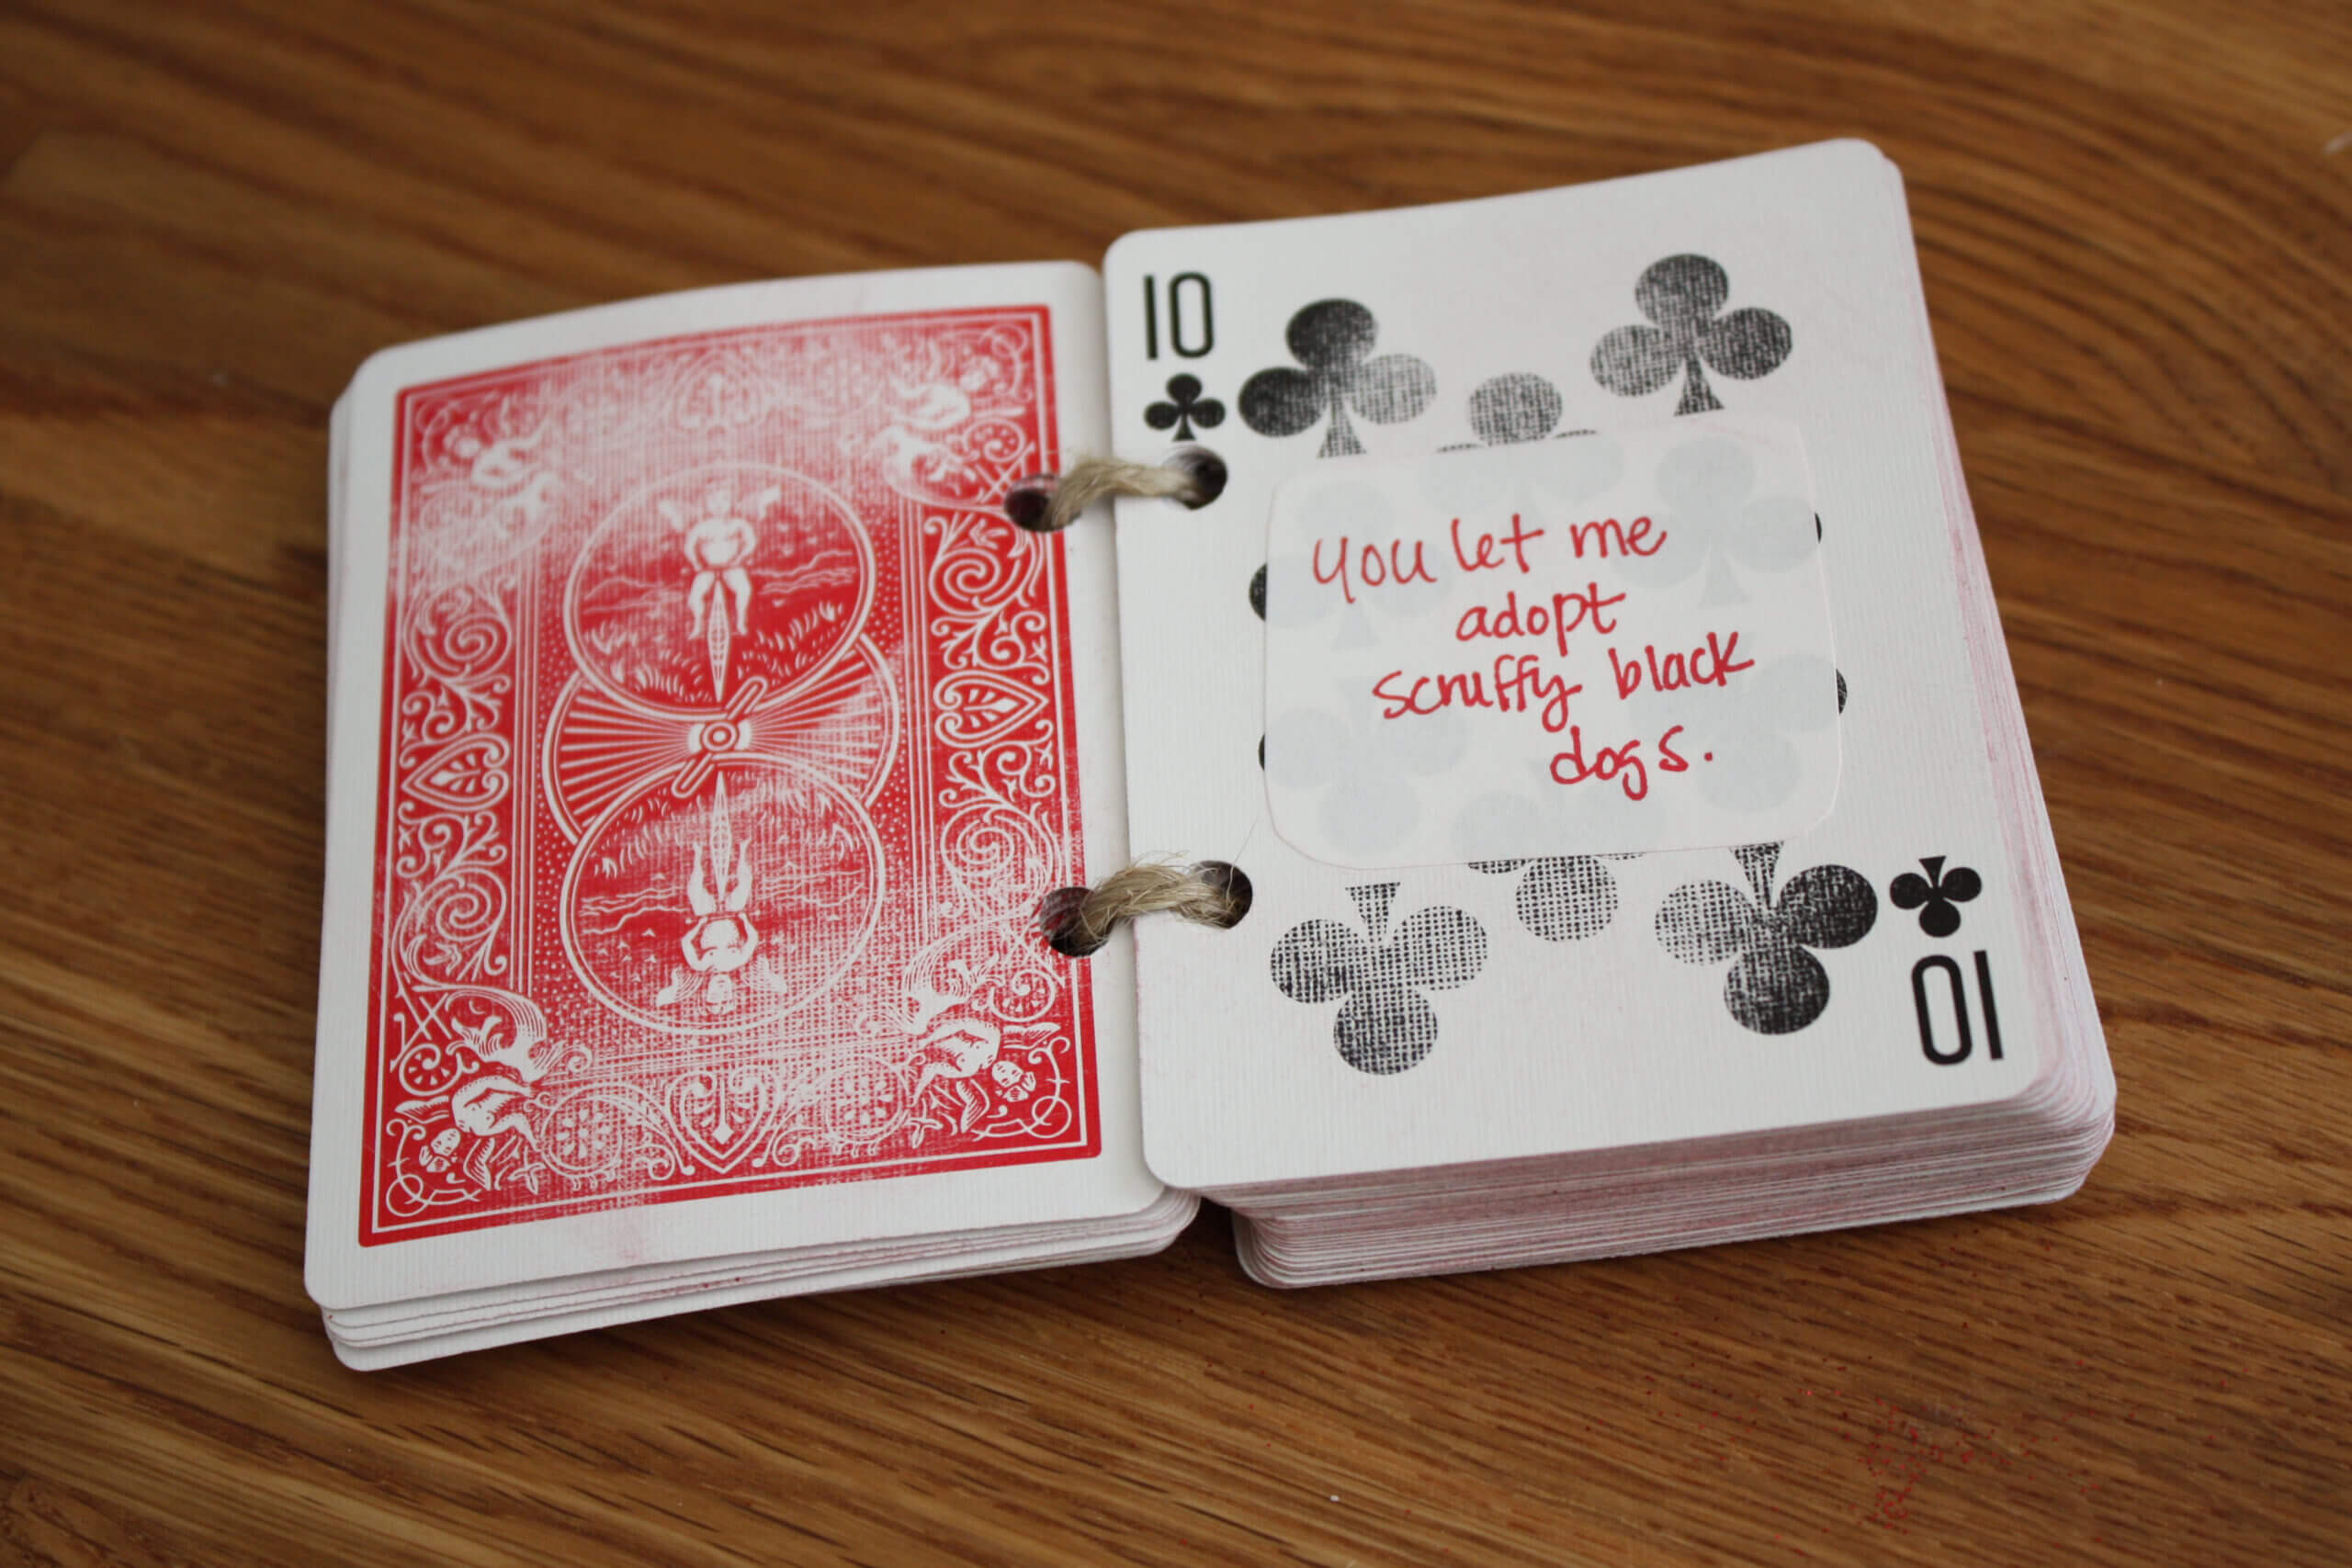 52 Reasons I Love You - Calep.midnightpig.co For 52 Reasons Why I Love You Cards Templates